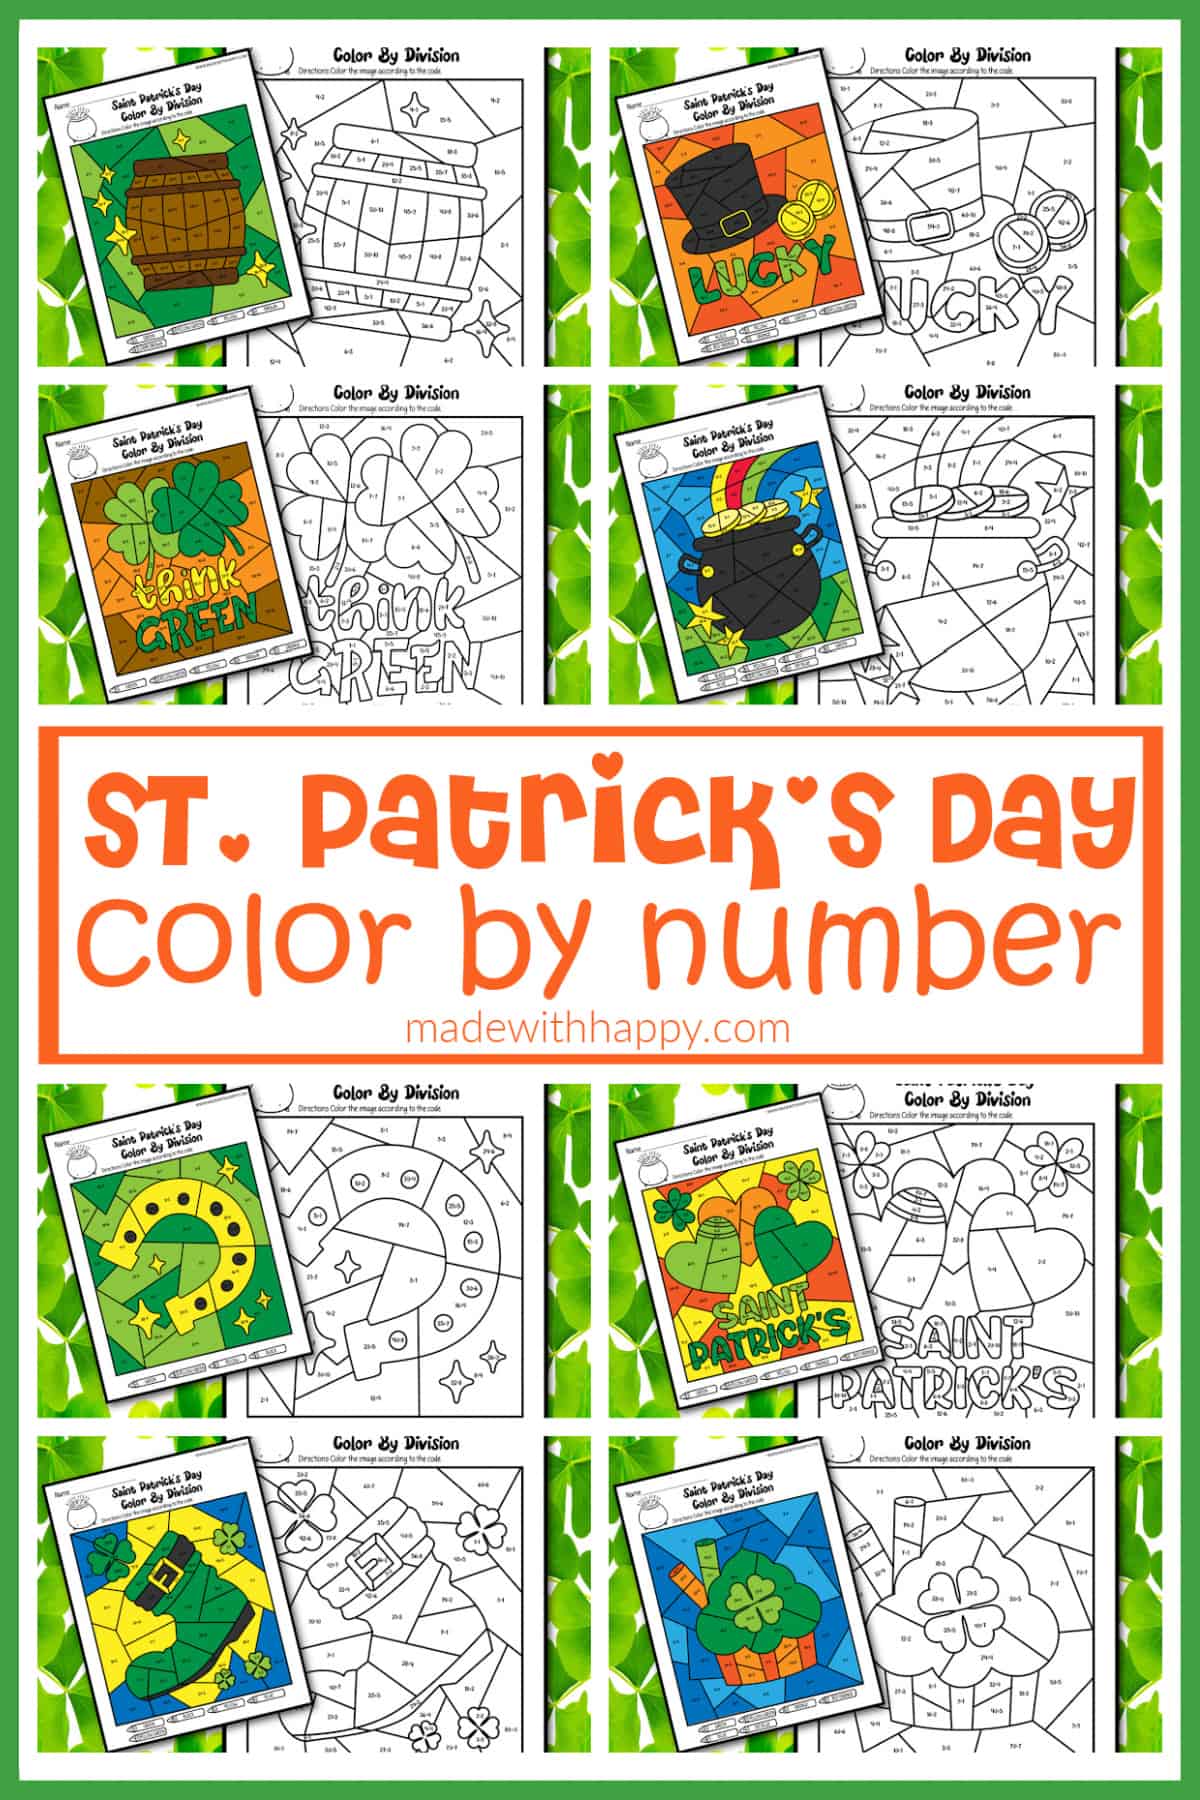 division color by number for st. patrick's day